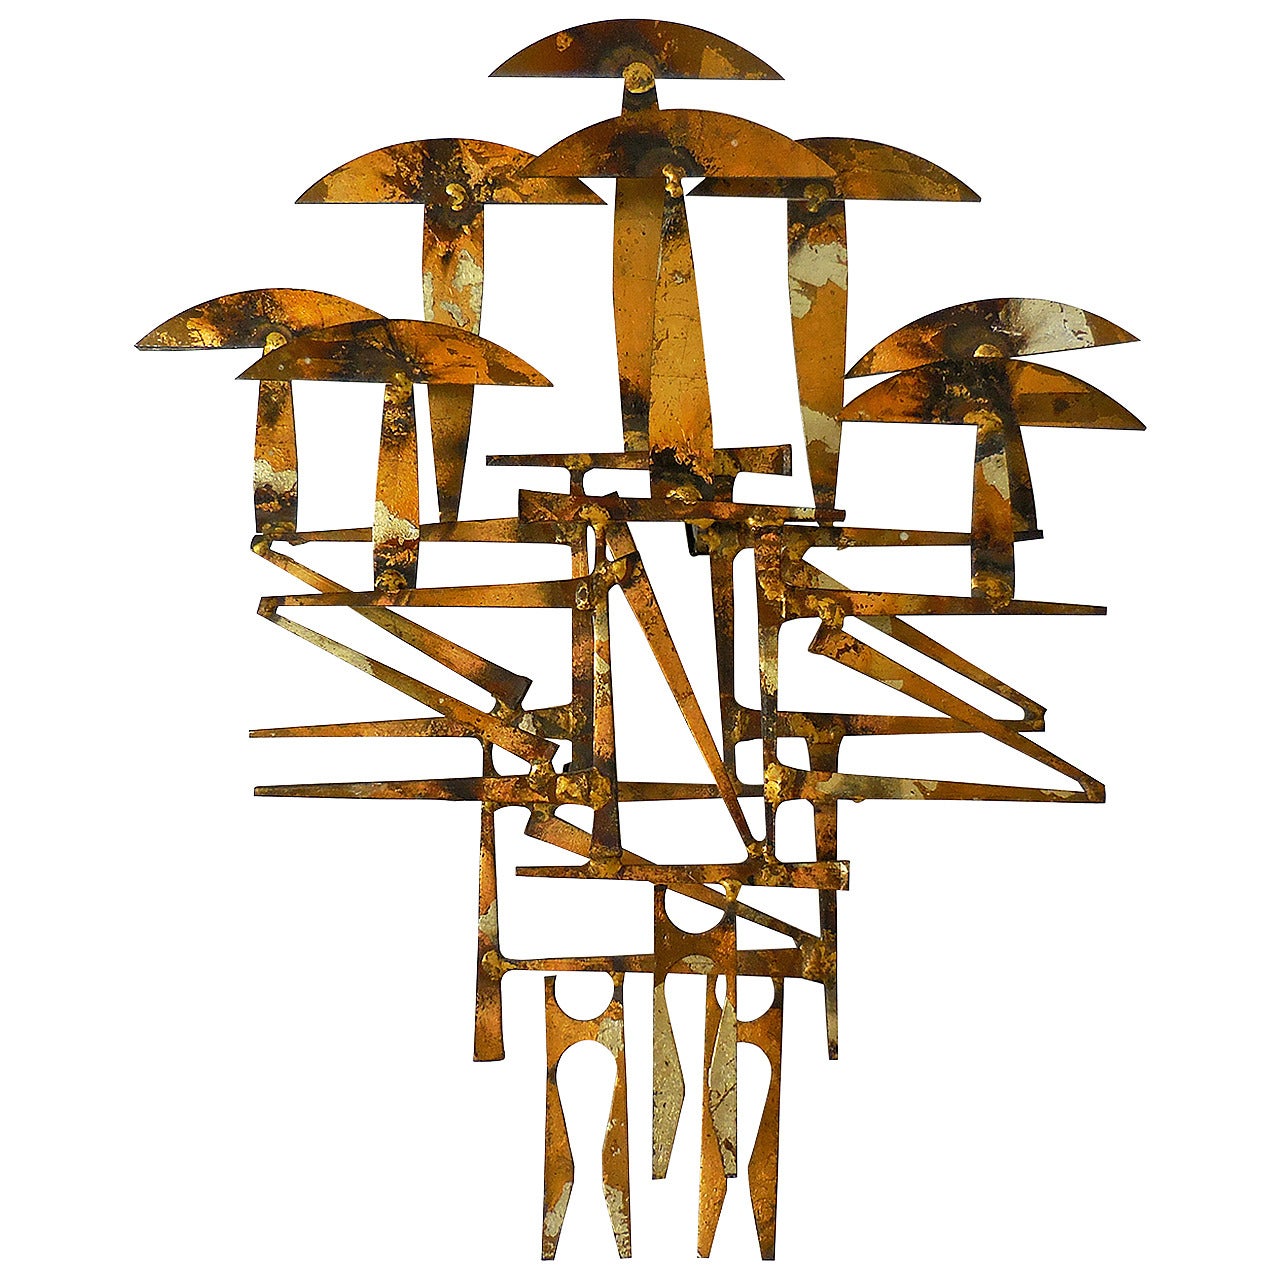 Whimsical Gilded Wall Sculpture by William Bowie, circa 1960s